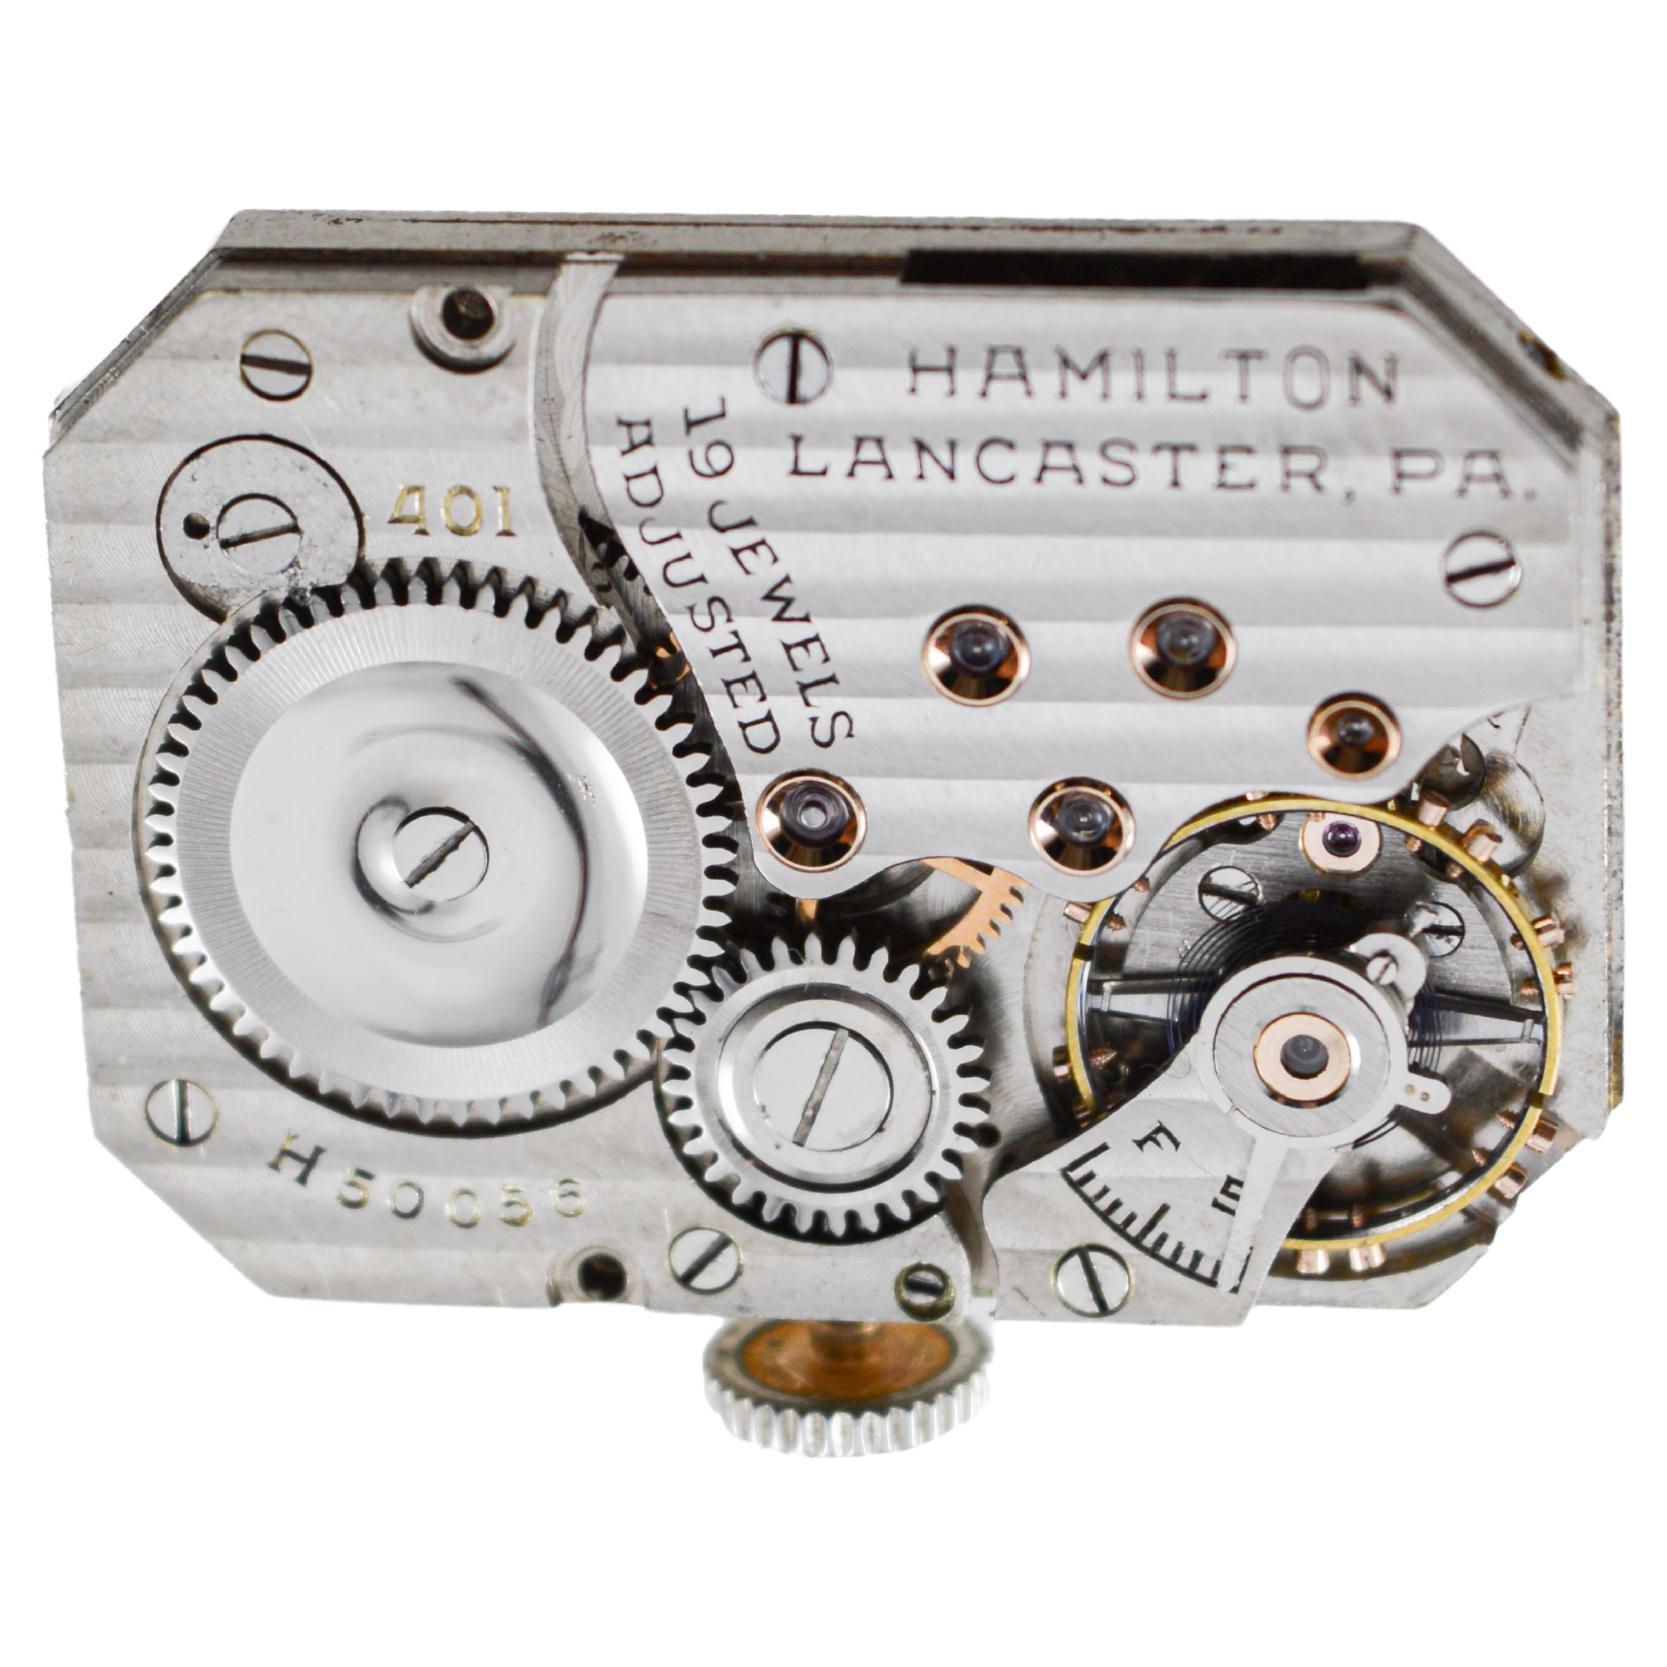 Hamilton 14K Solid White Gold Art Deco Watch with Presentation Back from 1932 For Sale 15